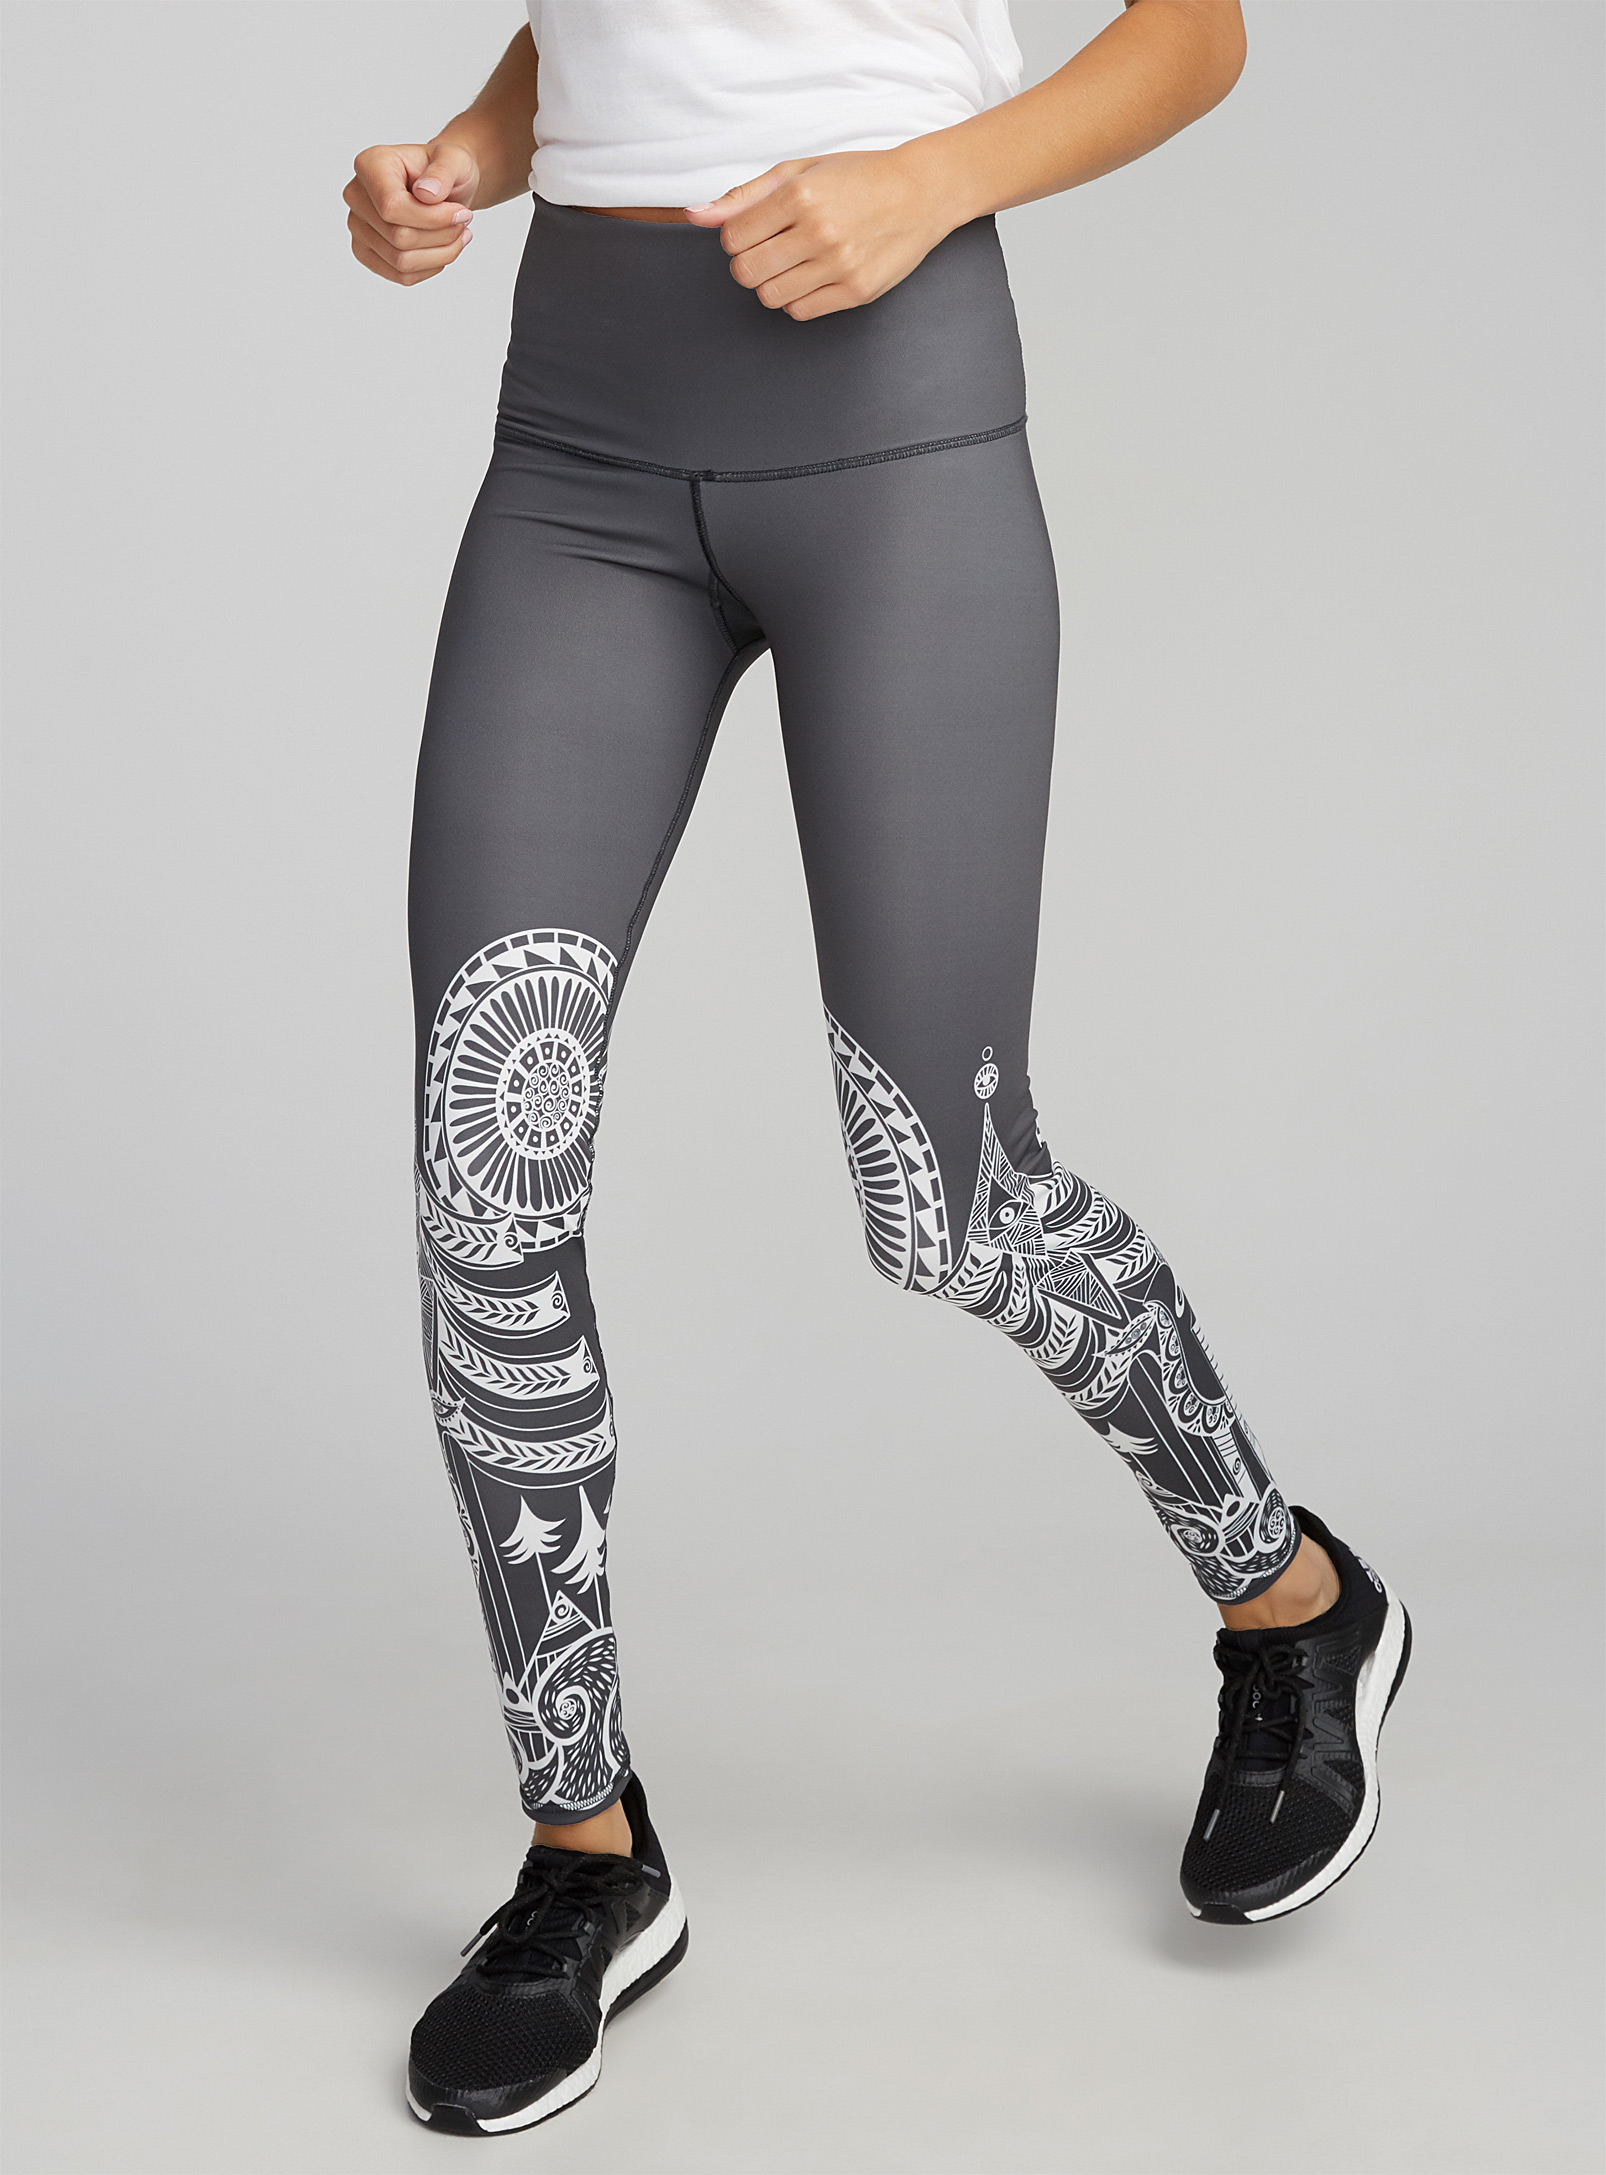 Sustainable Leggings Guide: 11 Ethical & Conscious Brands